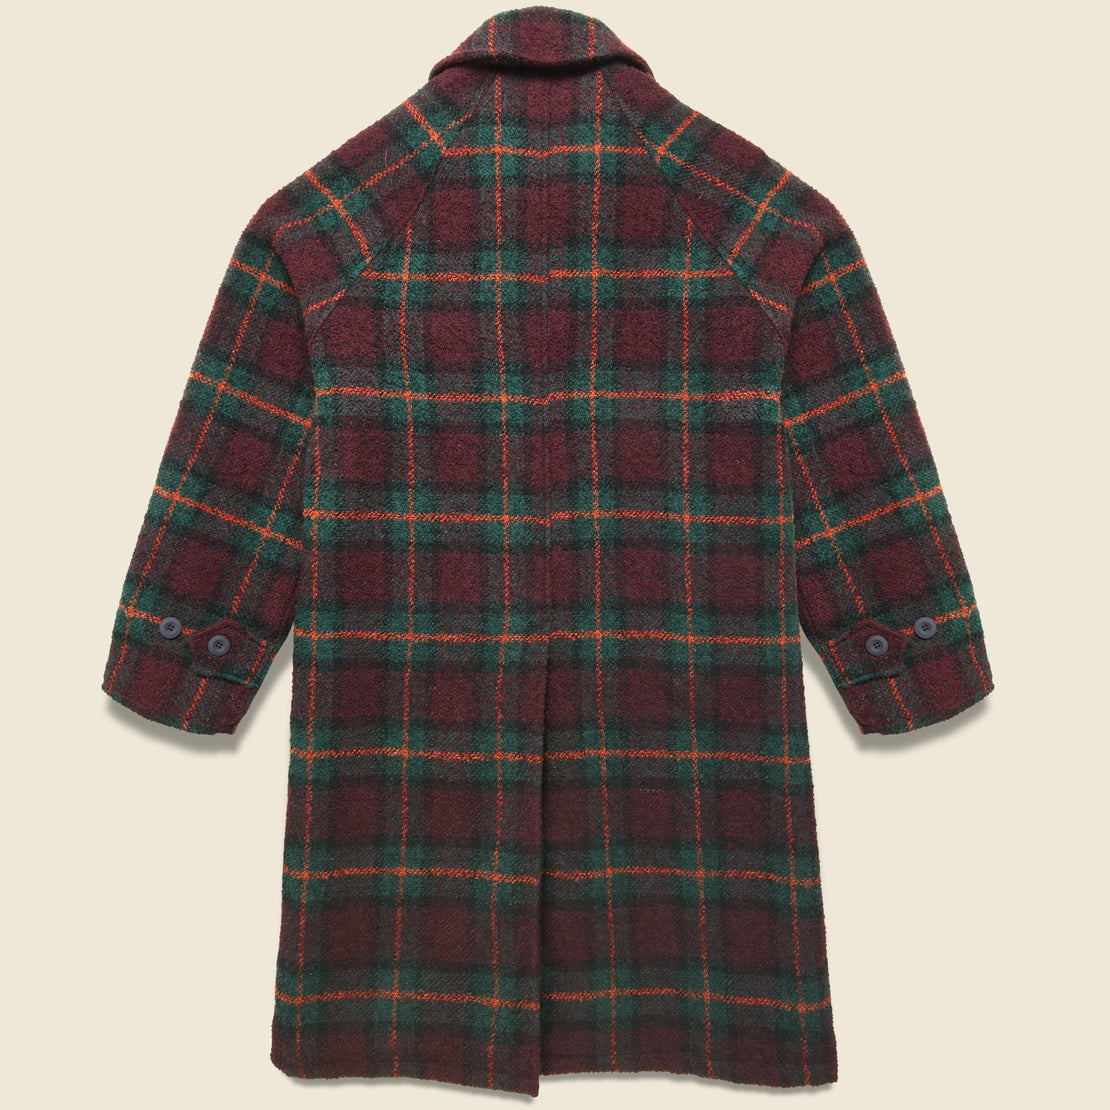 Lost in Space Jacket - Red Wool Check - Howlin - STAG Provisions - Outerwear - Coat / Jacket